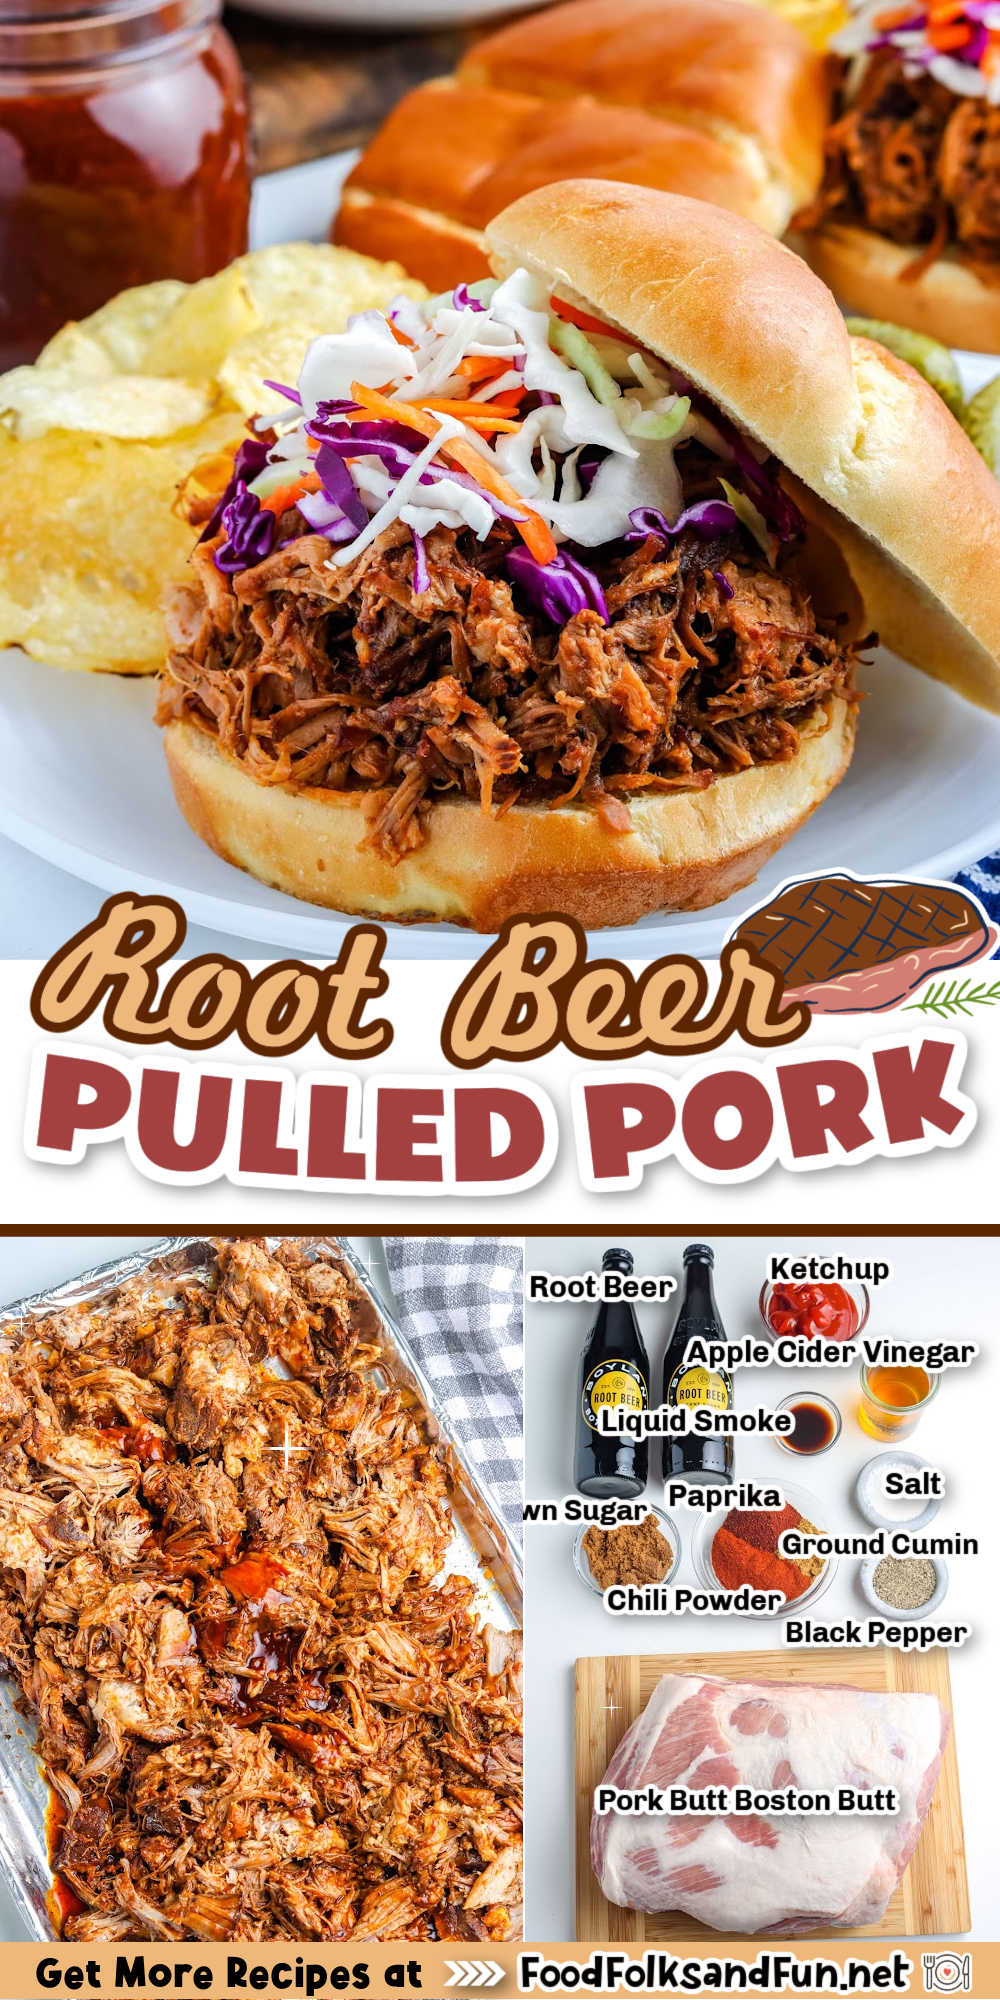 This Slow Cooker Root Beer Pulled Pork recipe is sweet, tangy, and downright delicious. It’s perfect for entertaining, and the root beer barbecue sauce alone is worth the make! via @foodfolksandfun